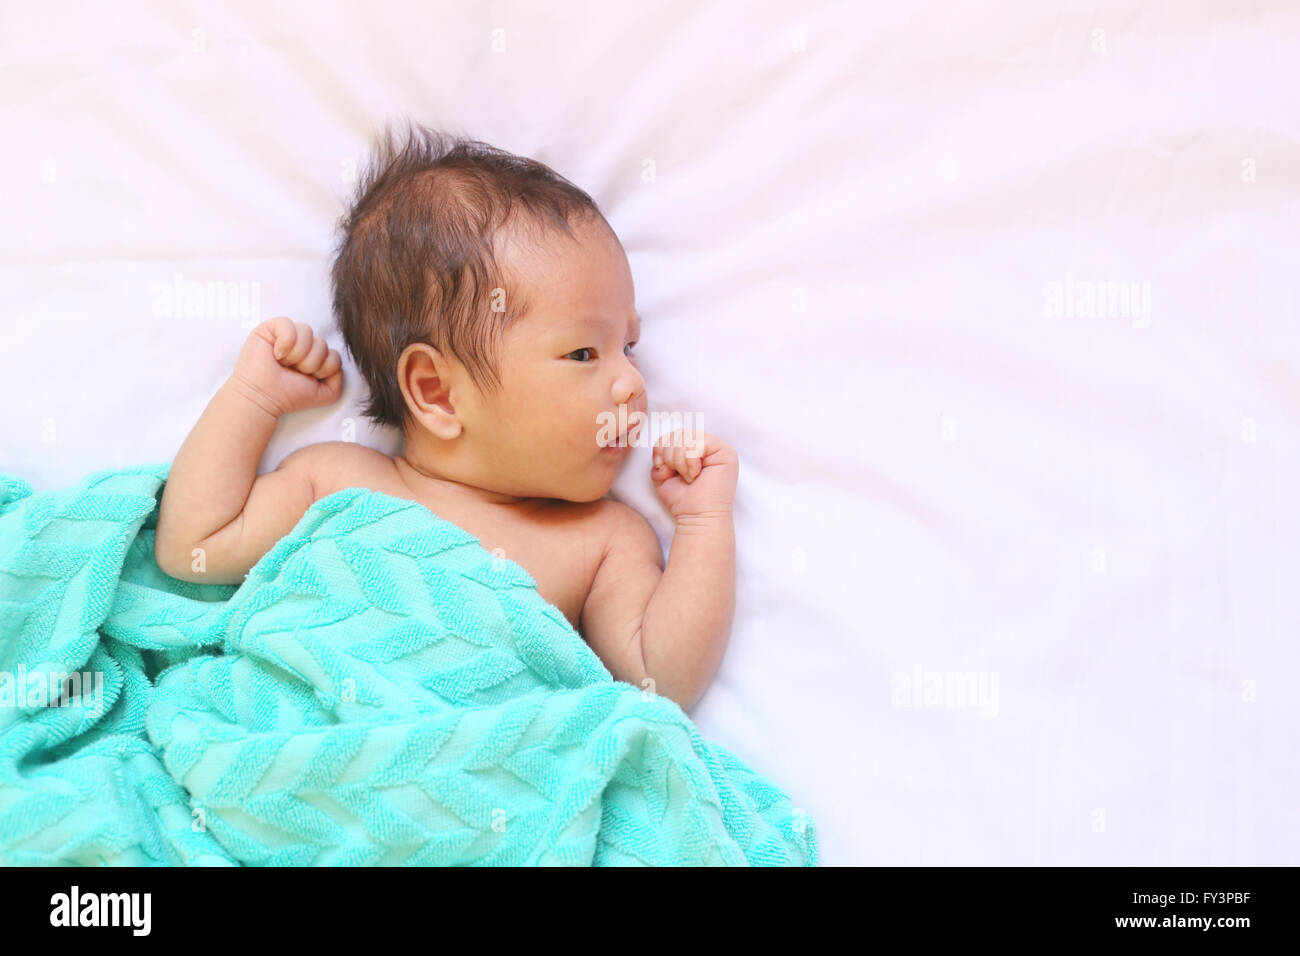 Newborn baby of asia relax in a good mood on white bed and looked happy,good health. Stock Photo